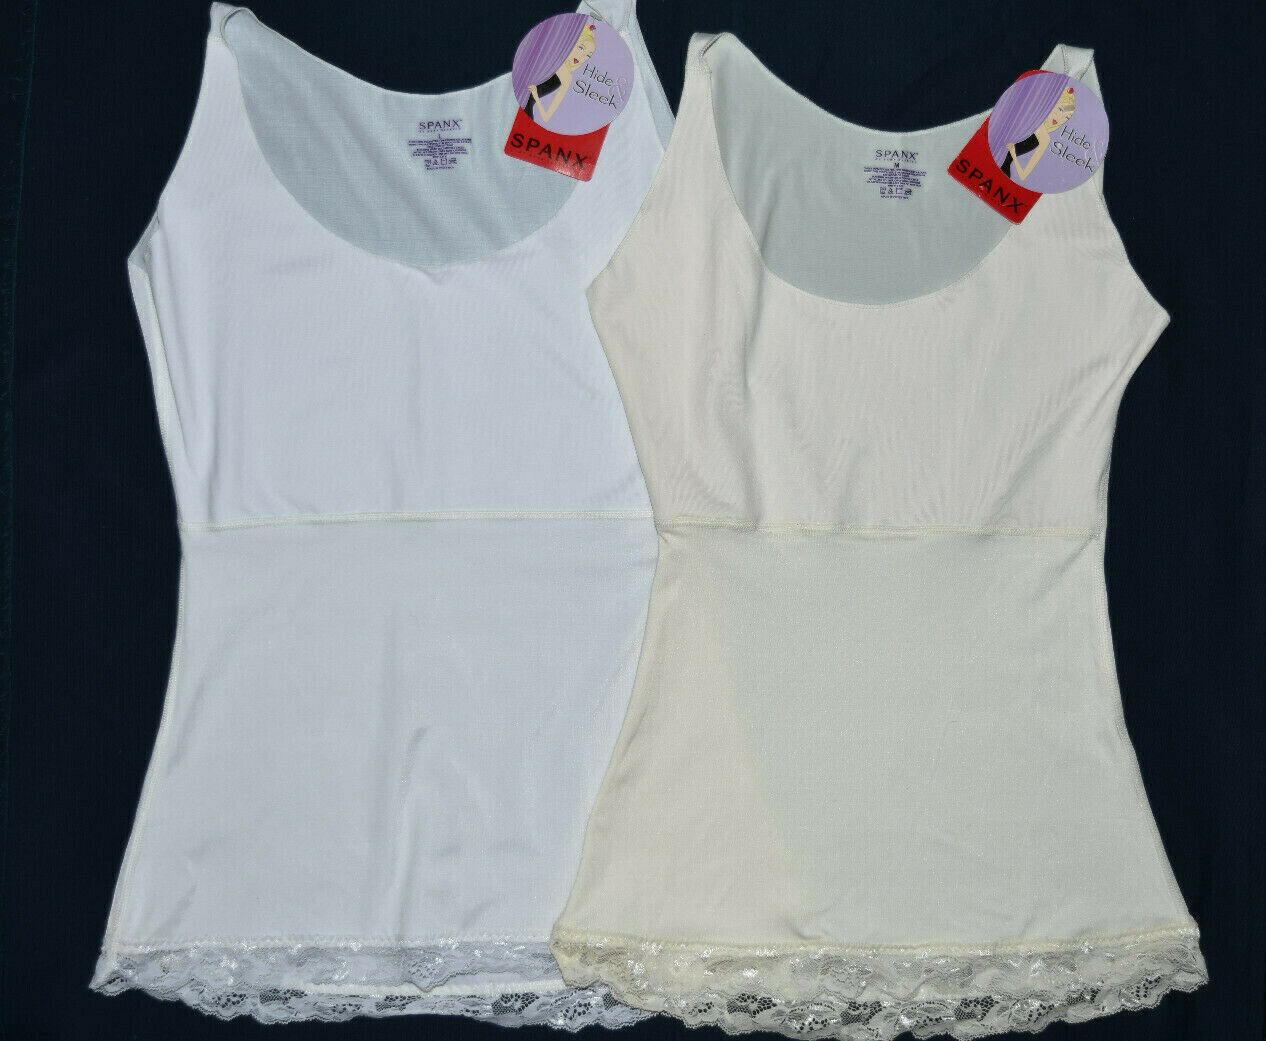 Nwt Spanx 177 Camisole W/ Lace Bottom Scoop Neck  You Choose